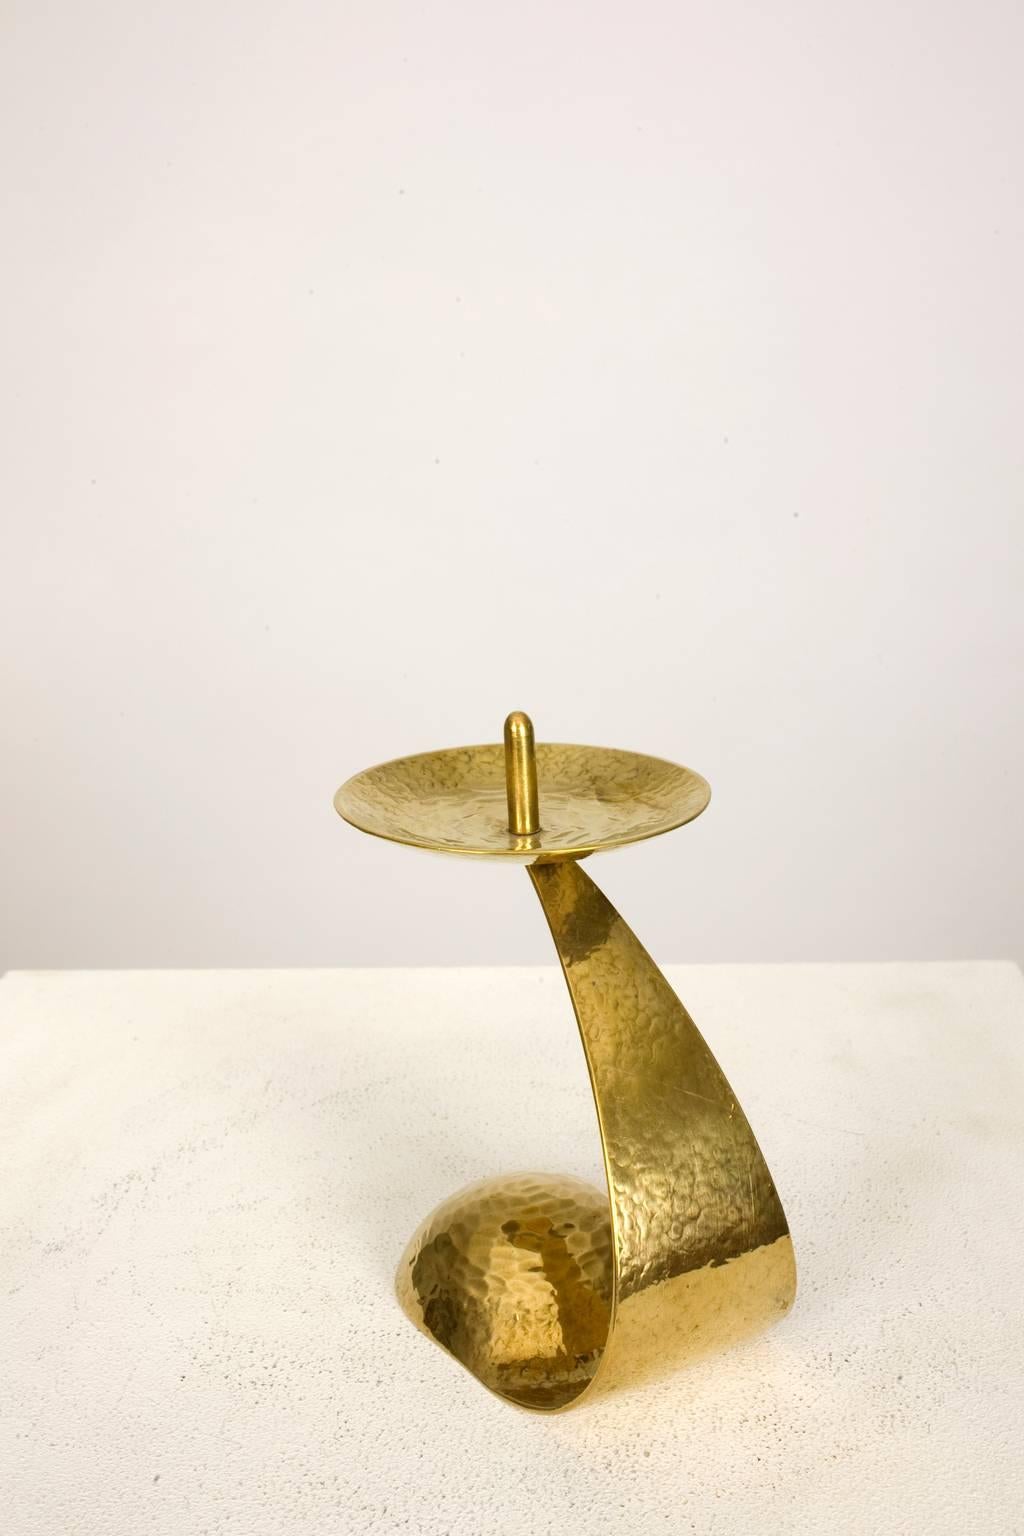 A beautiful desk set of five pieces made of hammered brass and created by Benno Meyer.

Can:
Height: 3.54 inch, diameter 2.44 inch.

Candleholder (big):
Height: 3.14 inch, diameter: 1.5 inch.

Candleholder (small):
Height: 1.98 inch,